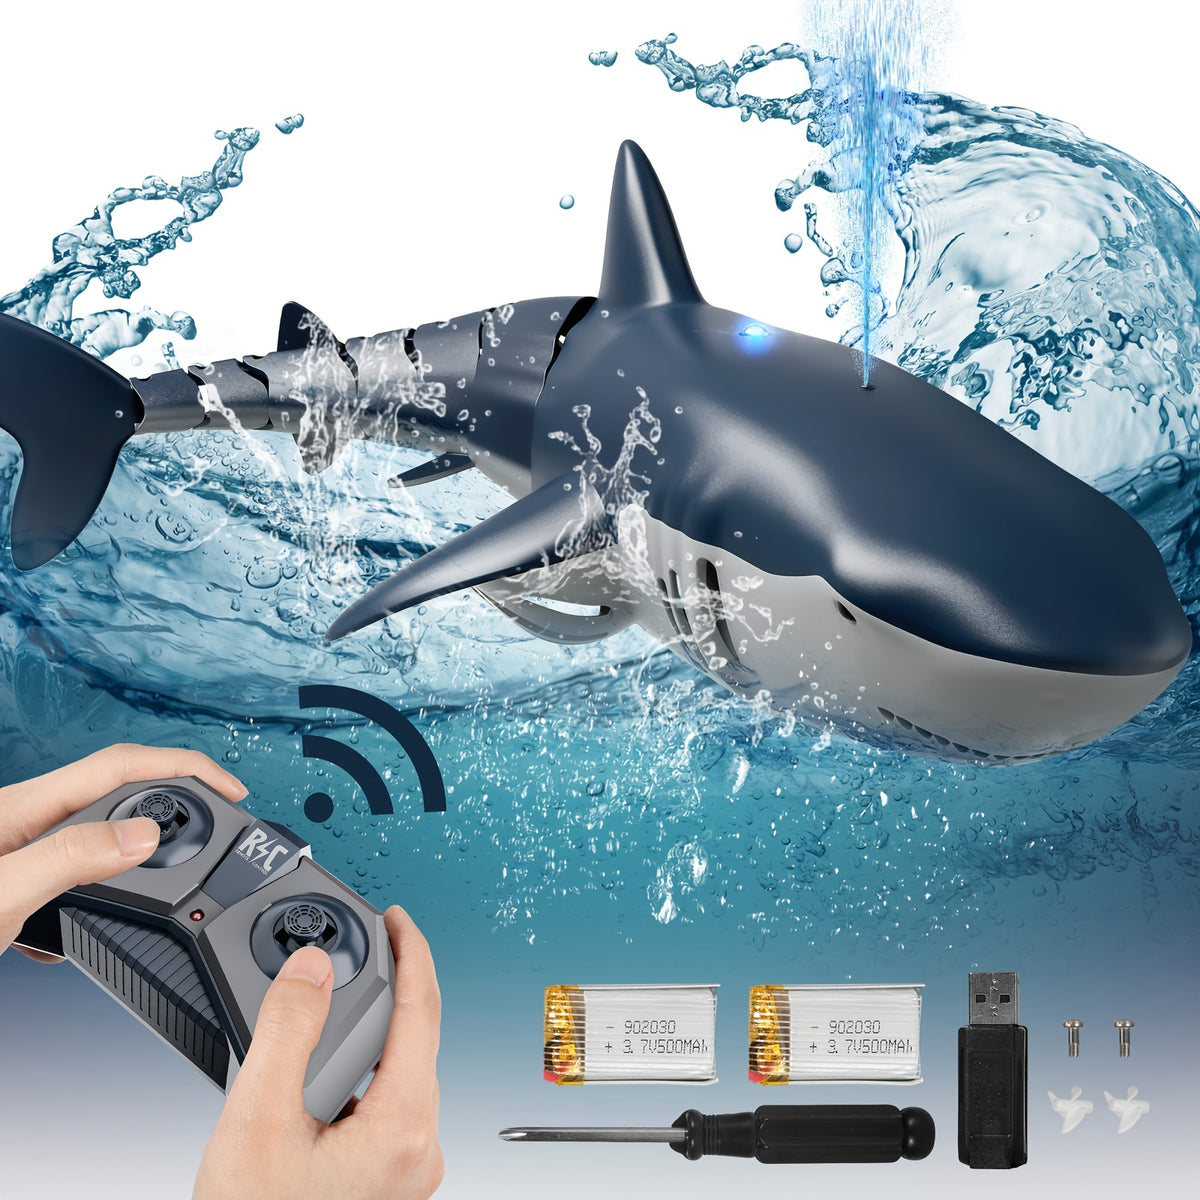 TEMI Remote Control Shark 1:18 High Simulation Scale Fish With Light & Spray Water For Lake Bathroom Pool Toys For Kids Boys Halloween Christmas Birthday Gift RC Boat